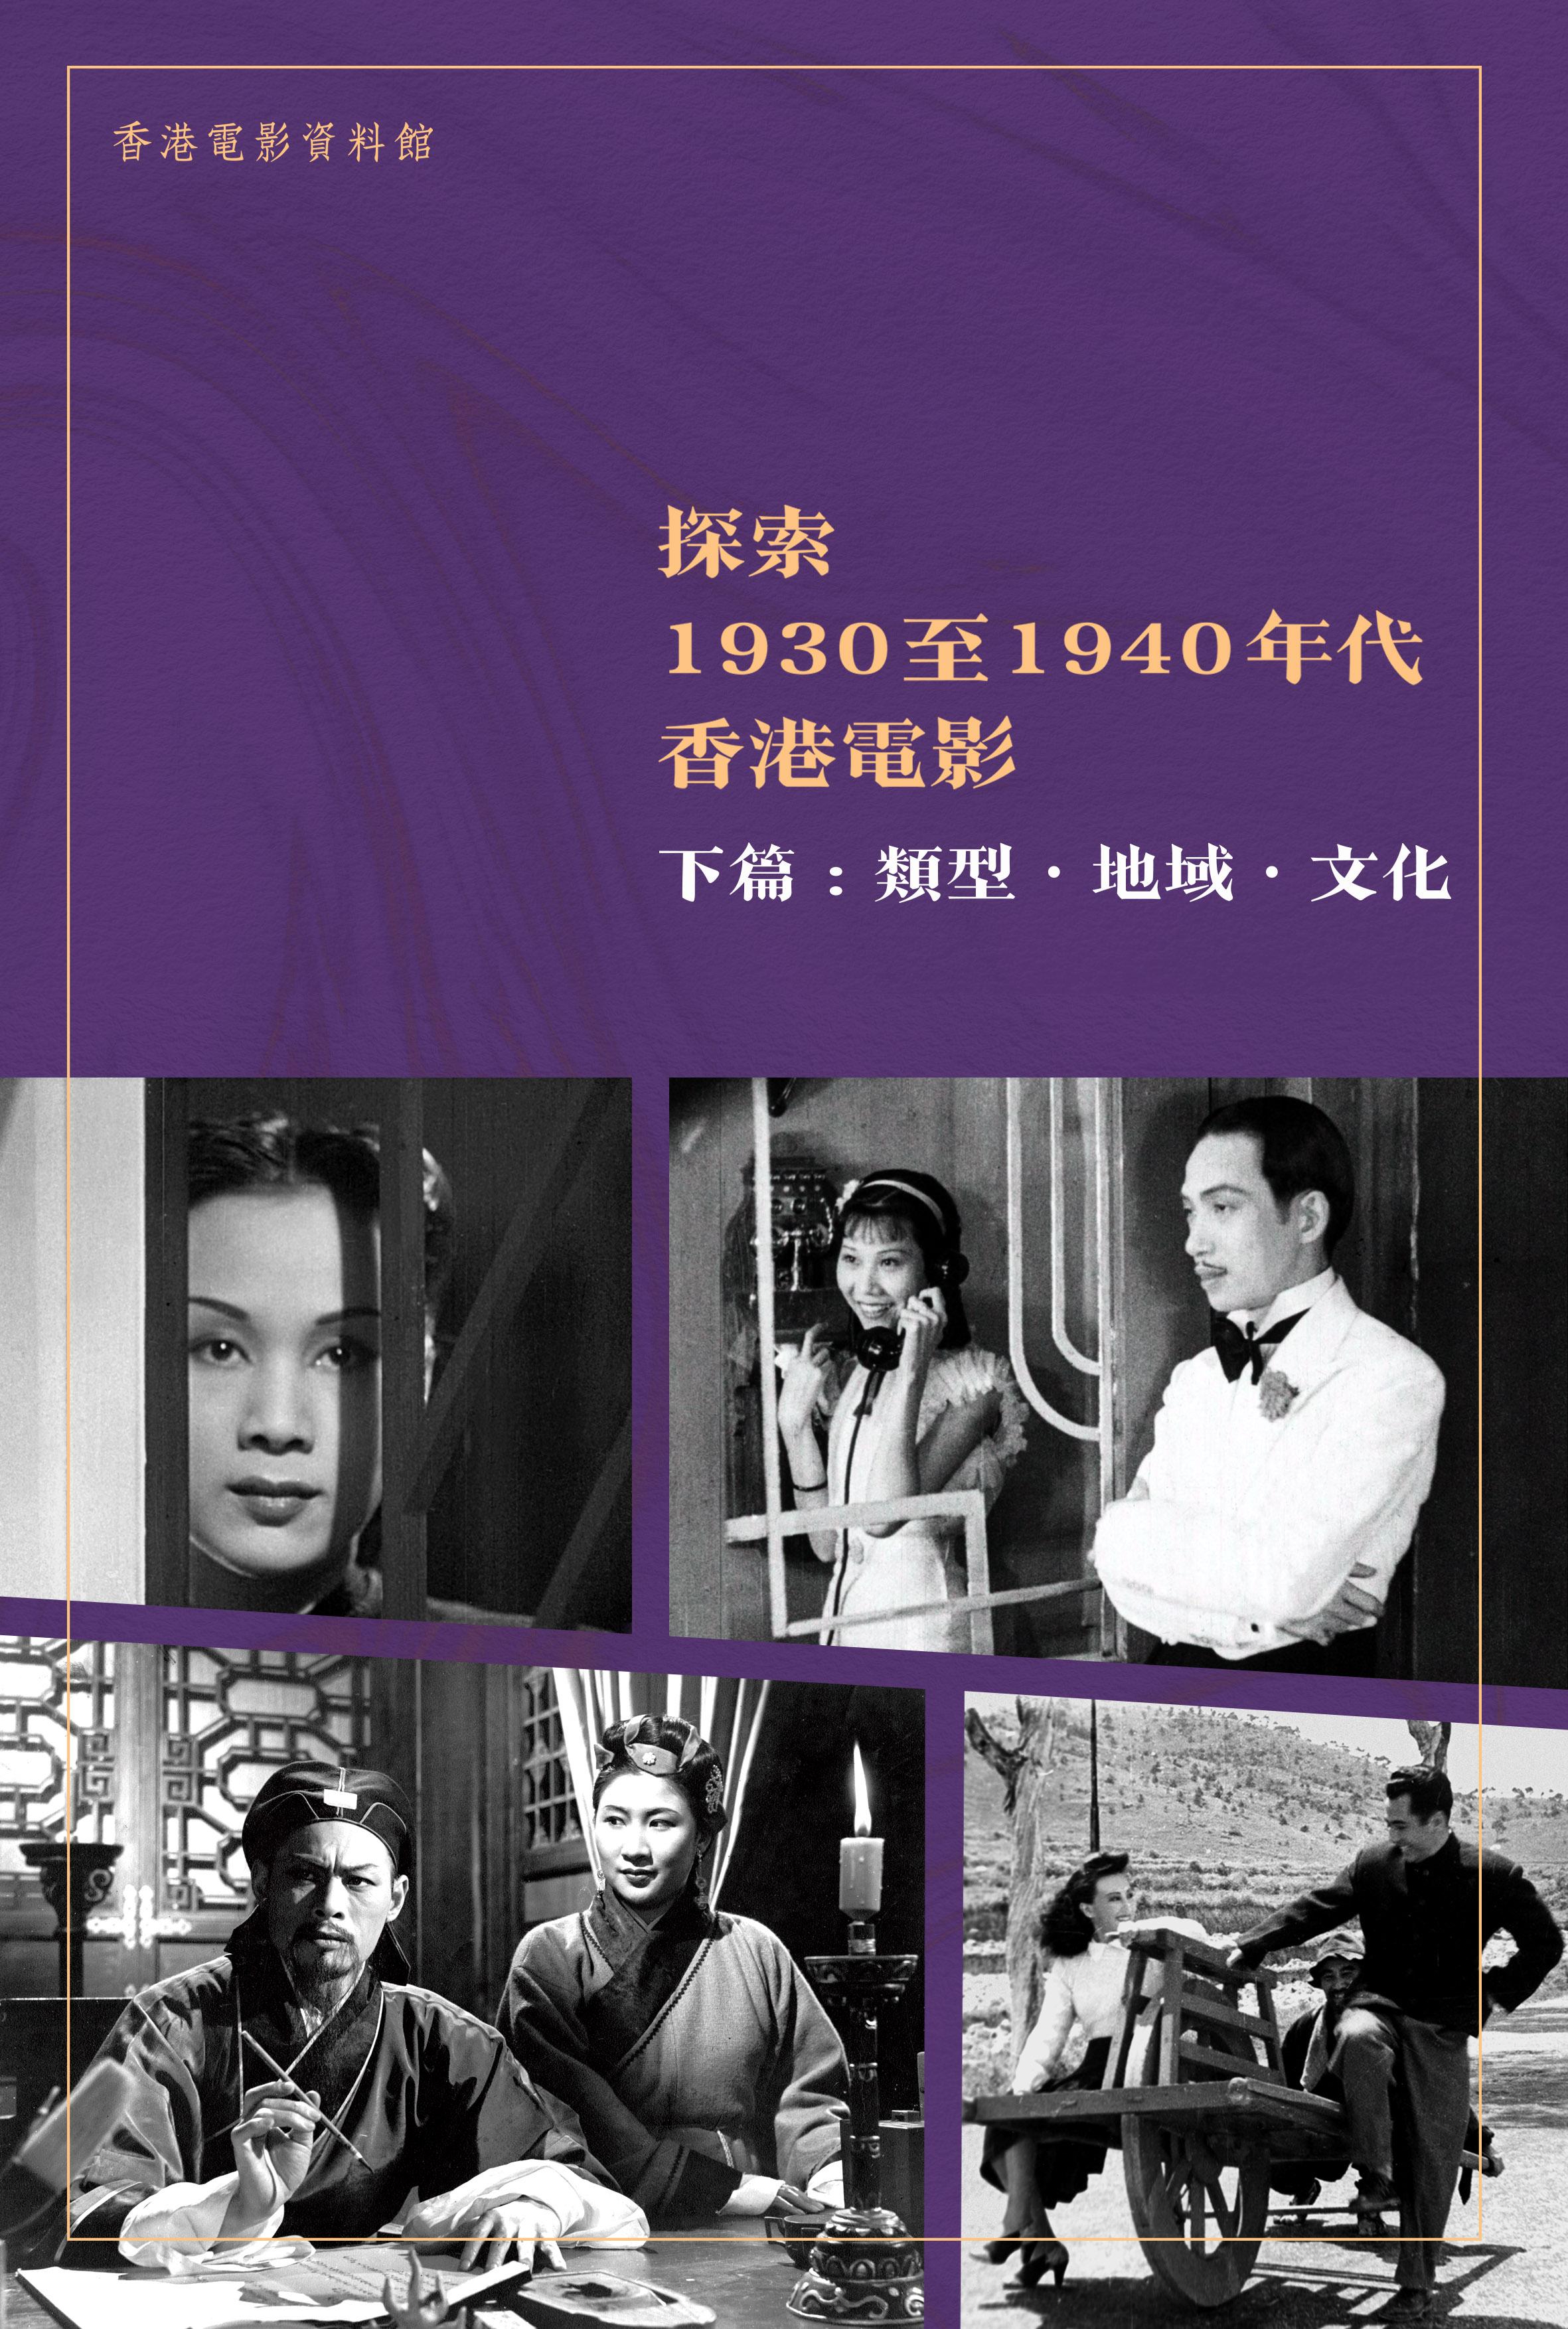 The e-book "Exploring Hong Kong Films of the 1930s and 1940s" (in Chinese only), published by the Hong Kong Film Archive of the Leisure and Cultural Services Department, is now available for free download. "Part 2: Genres‧Regions‧Culture" of the publication explores various film genres produced at the time, analysing their artistic and cultural values in an attempt to understand the great development potential of the local industry in its early days.